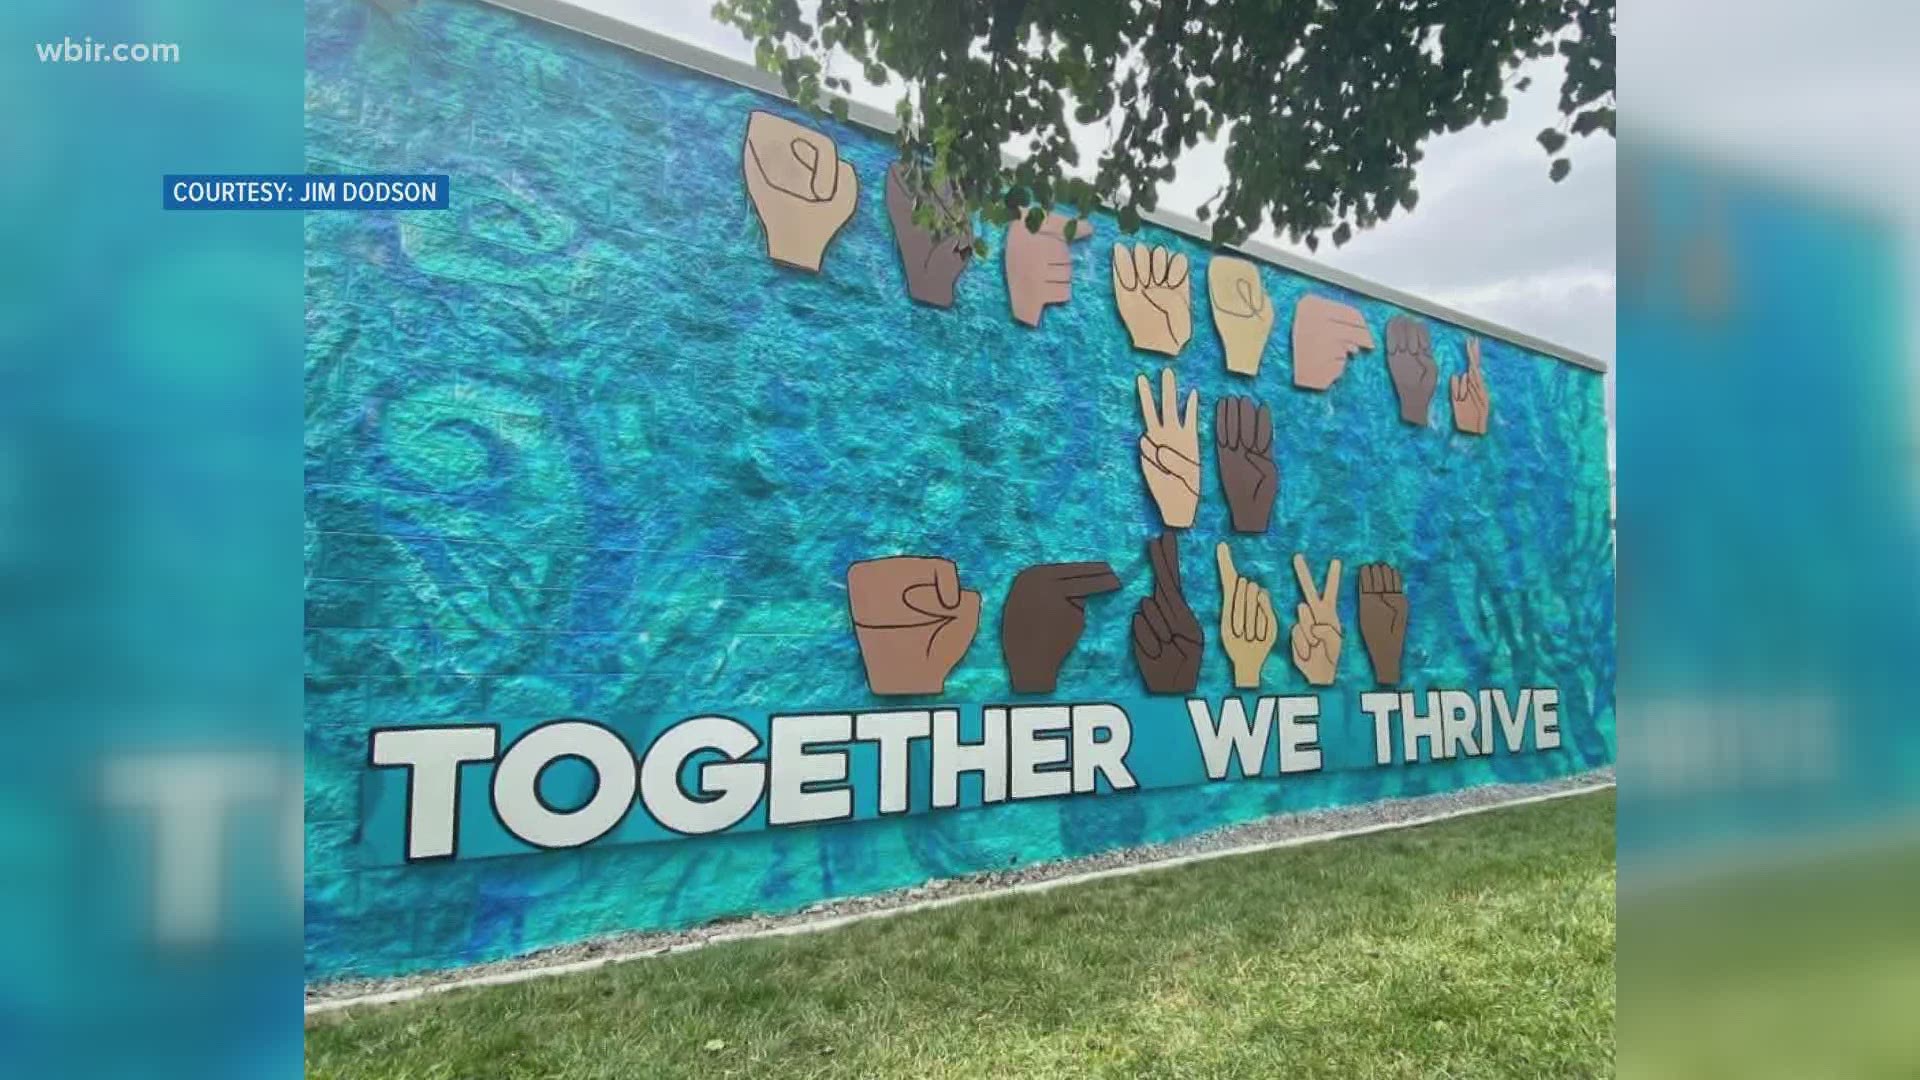 Jefferson Middle art teacher Jim Dodson shared these photos on Facebook of the "together we thrive" mural.